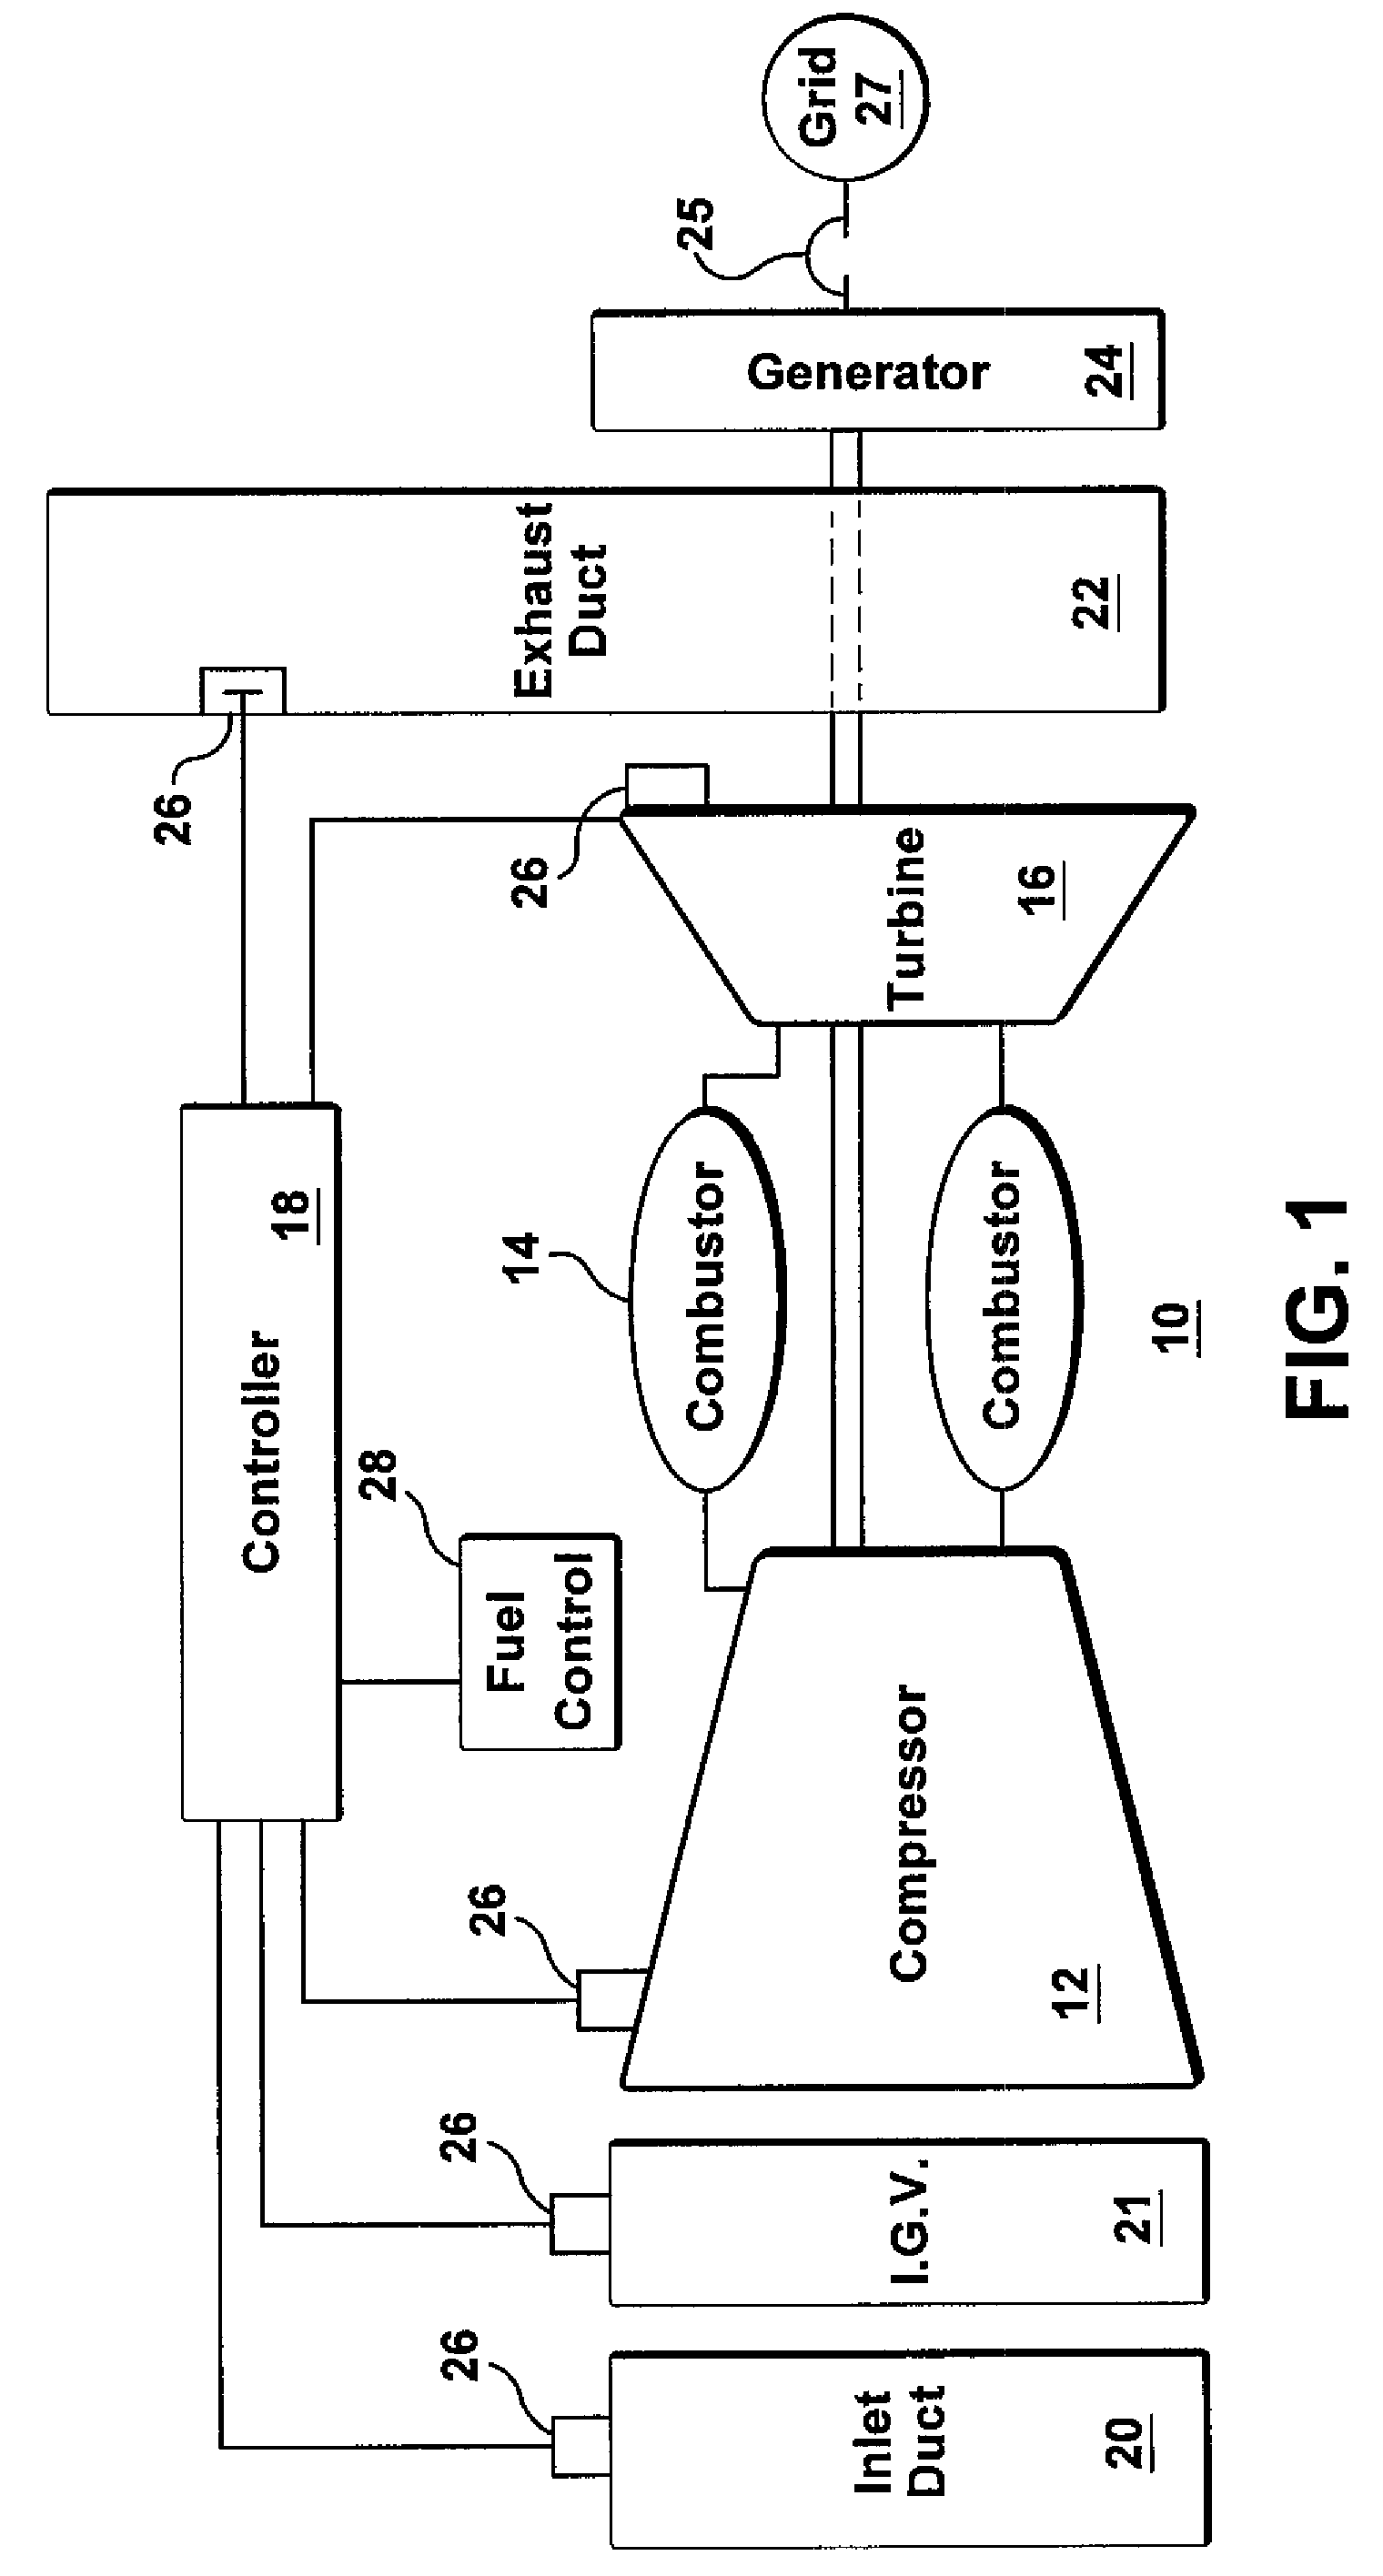 Method and system for detection of gas turbine combustion blowouts utilizing fuel normalized power response